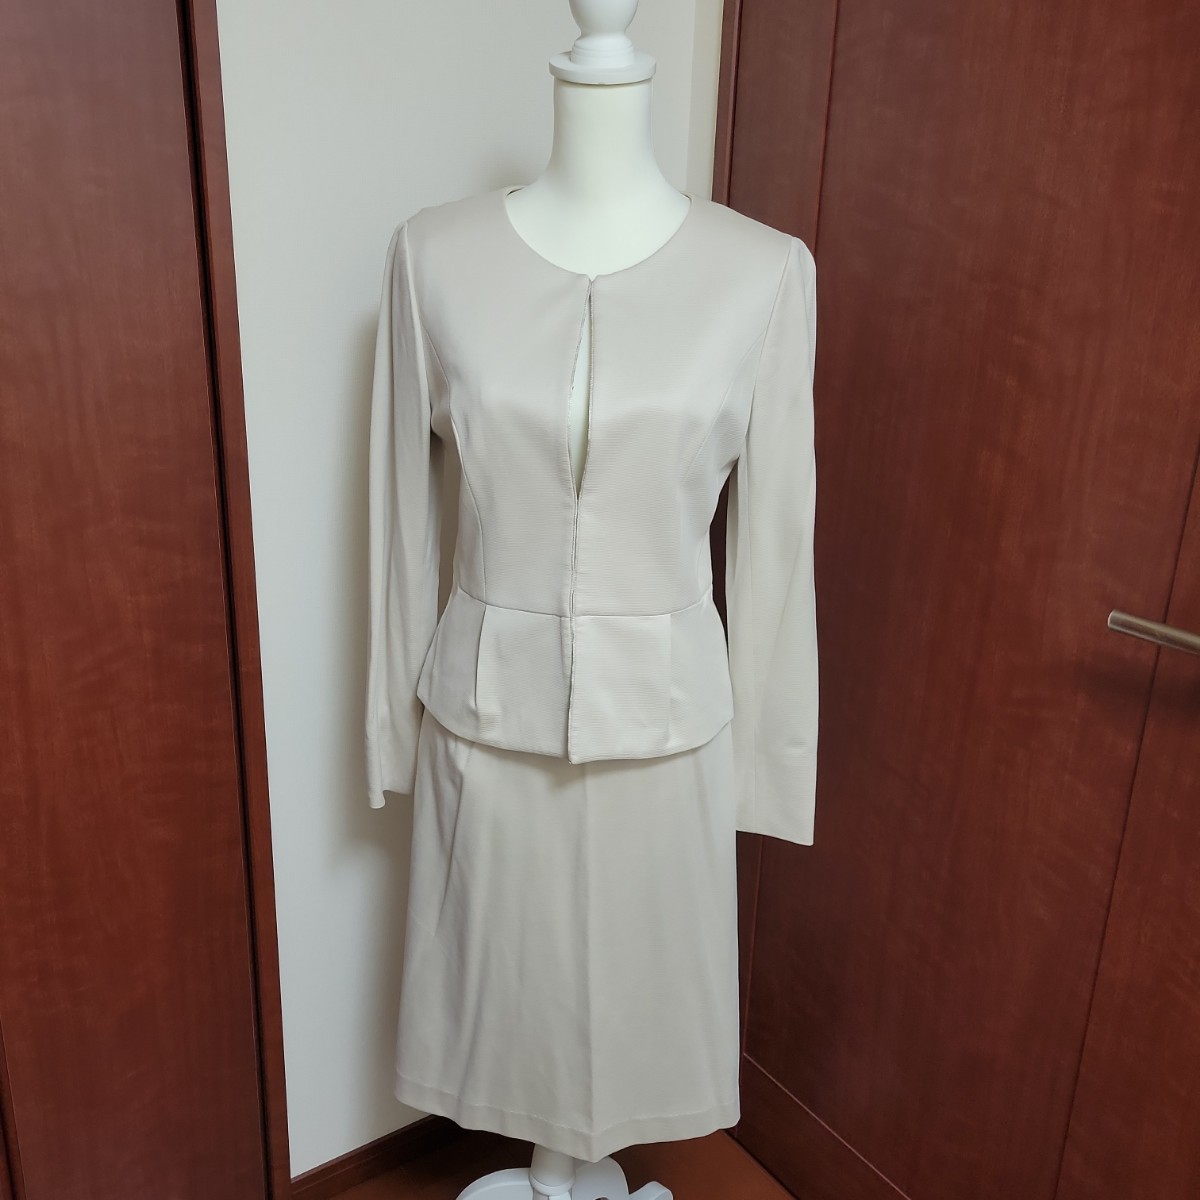  Untitled UNTITLED skirt suit large size 4 ivory total lining ceremony also skirt height is approximately 58cm..